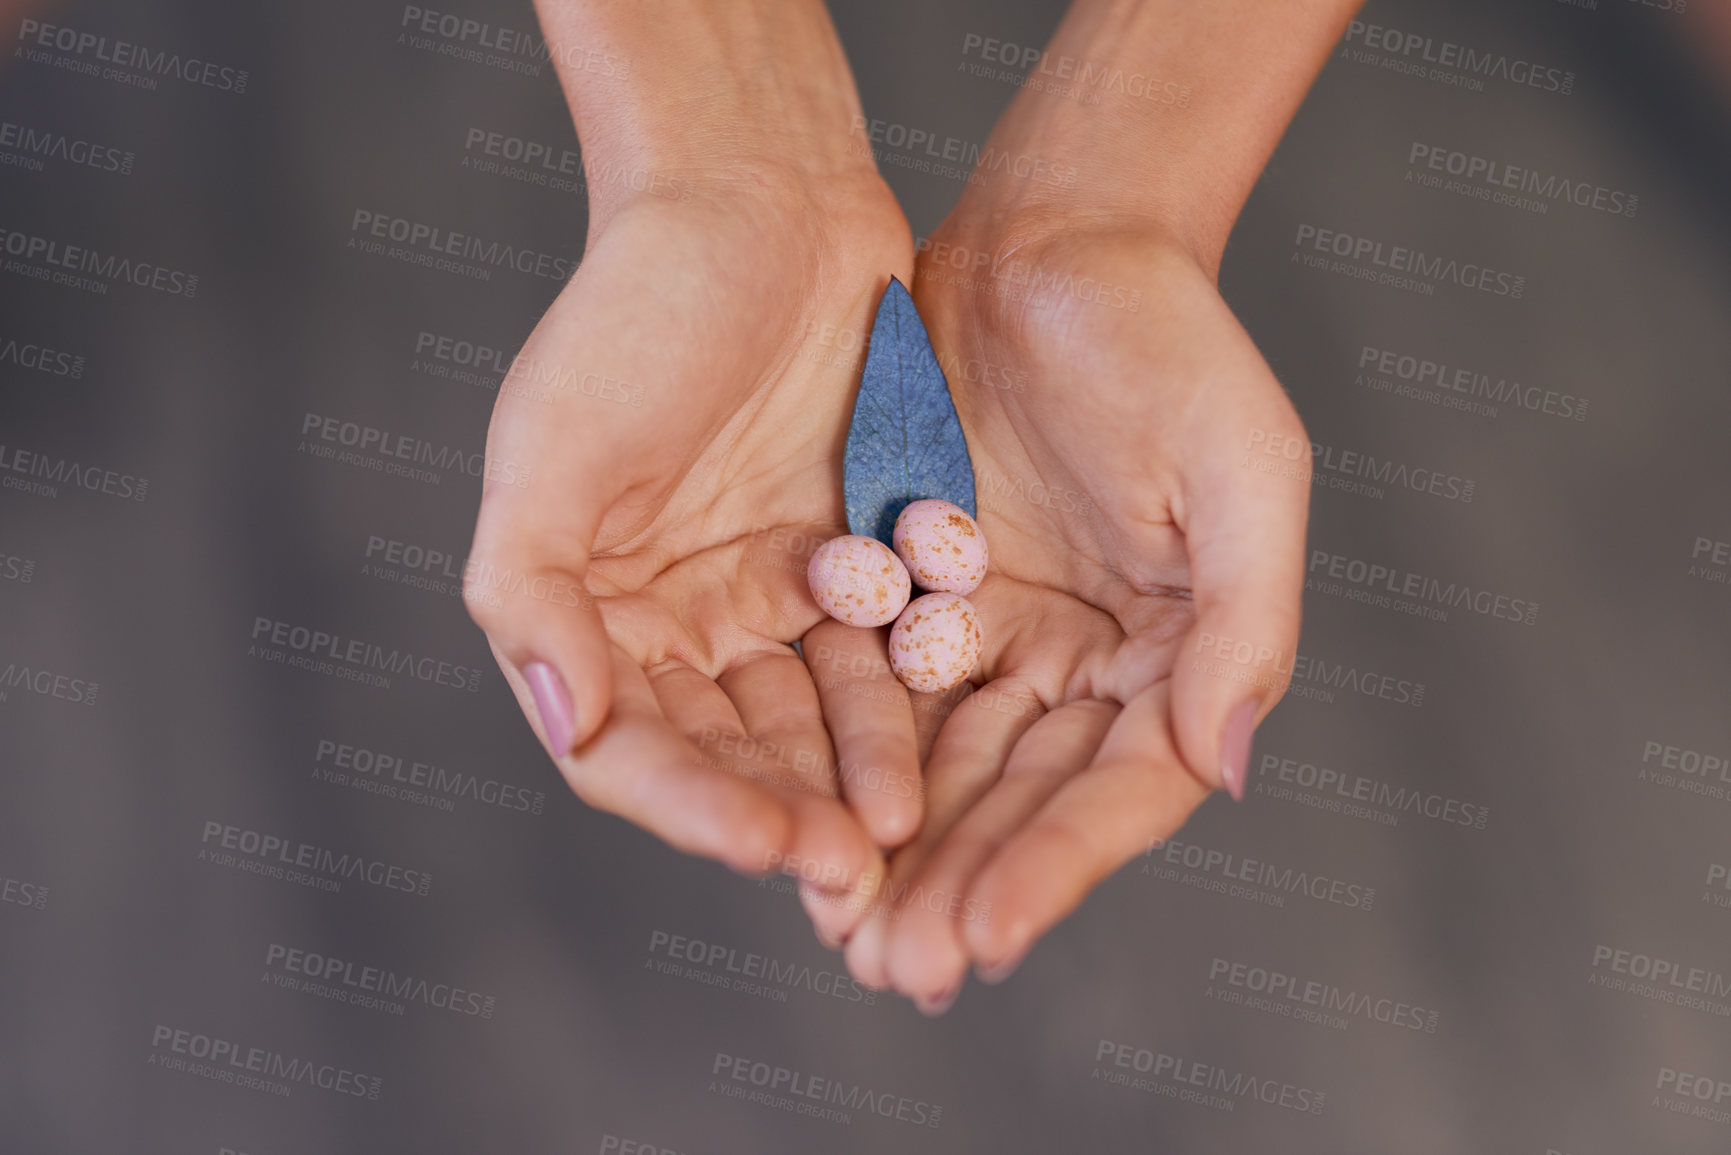 Buy stock photo Shot of an unrecognizable woman holding speckled eggs and a blue leaf against a grey background